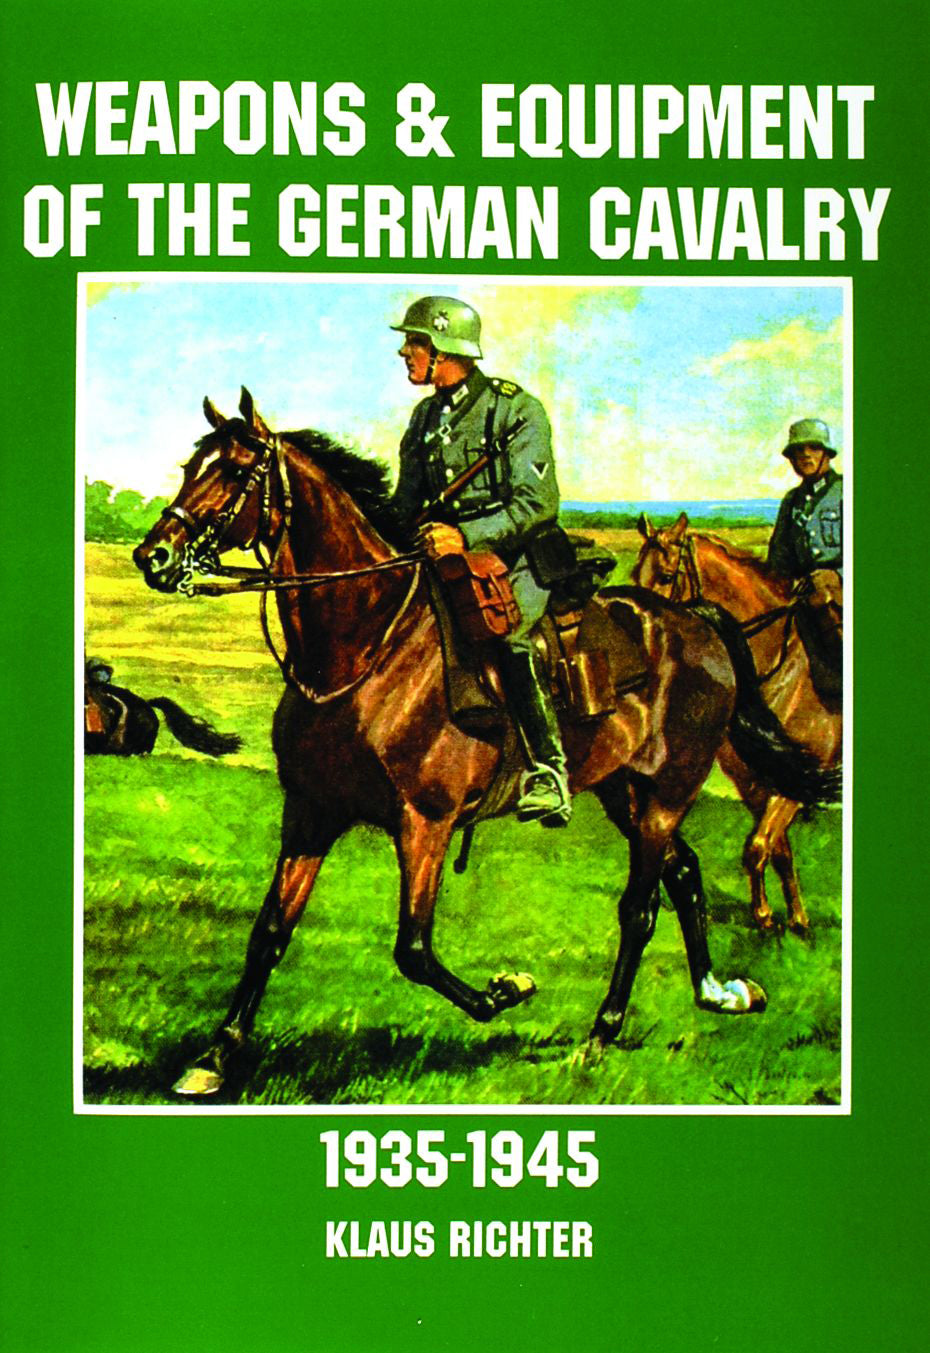 Weapons and Equipment of the German Cavalry in World War II